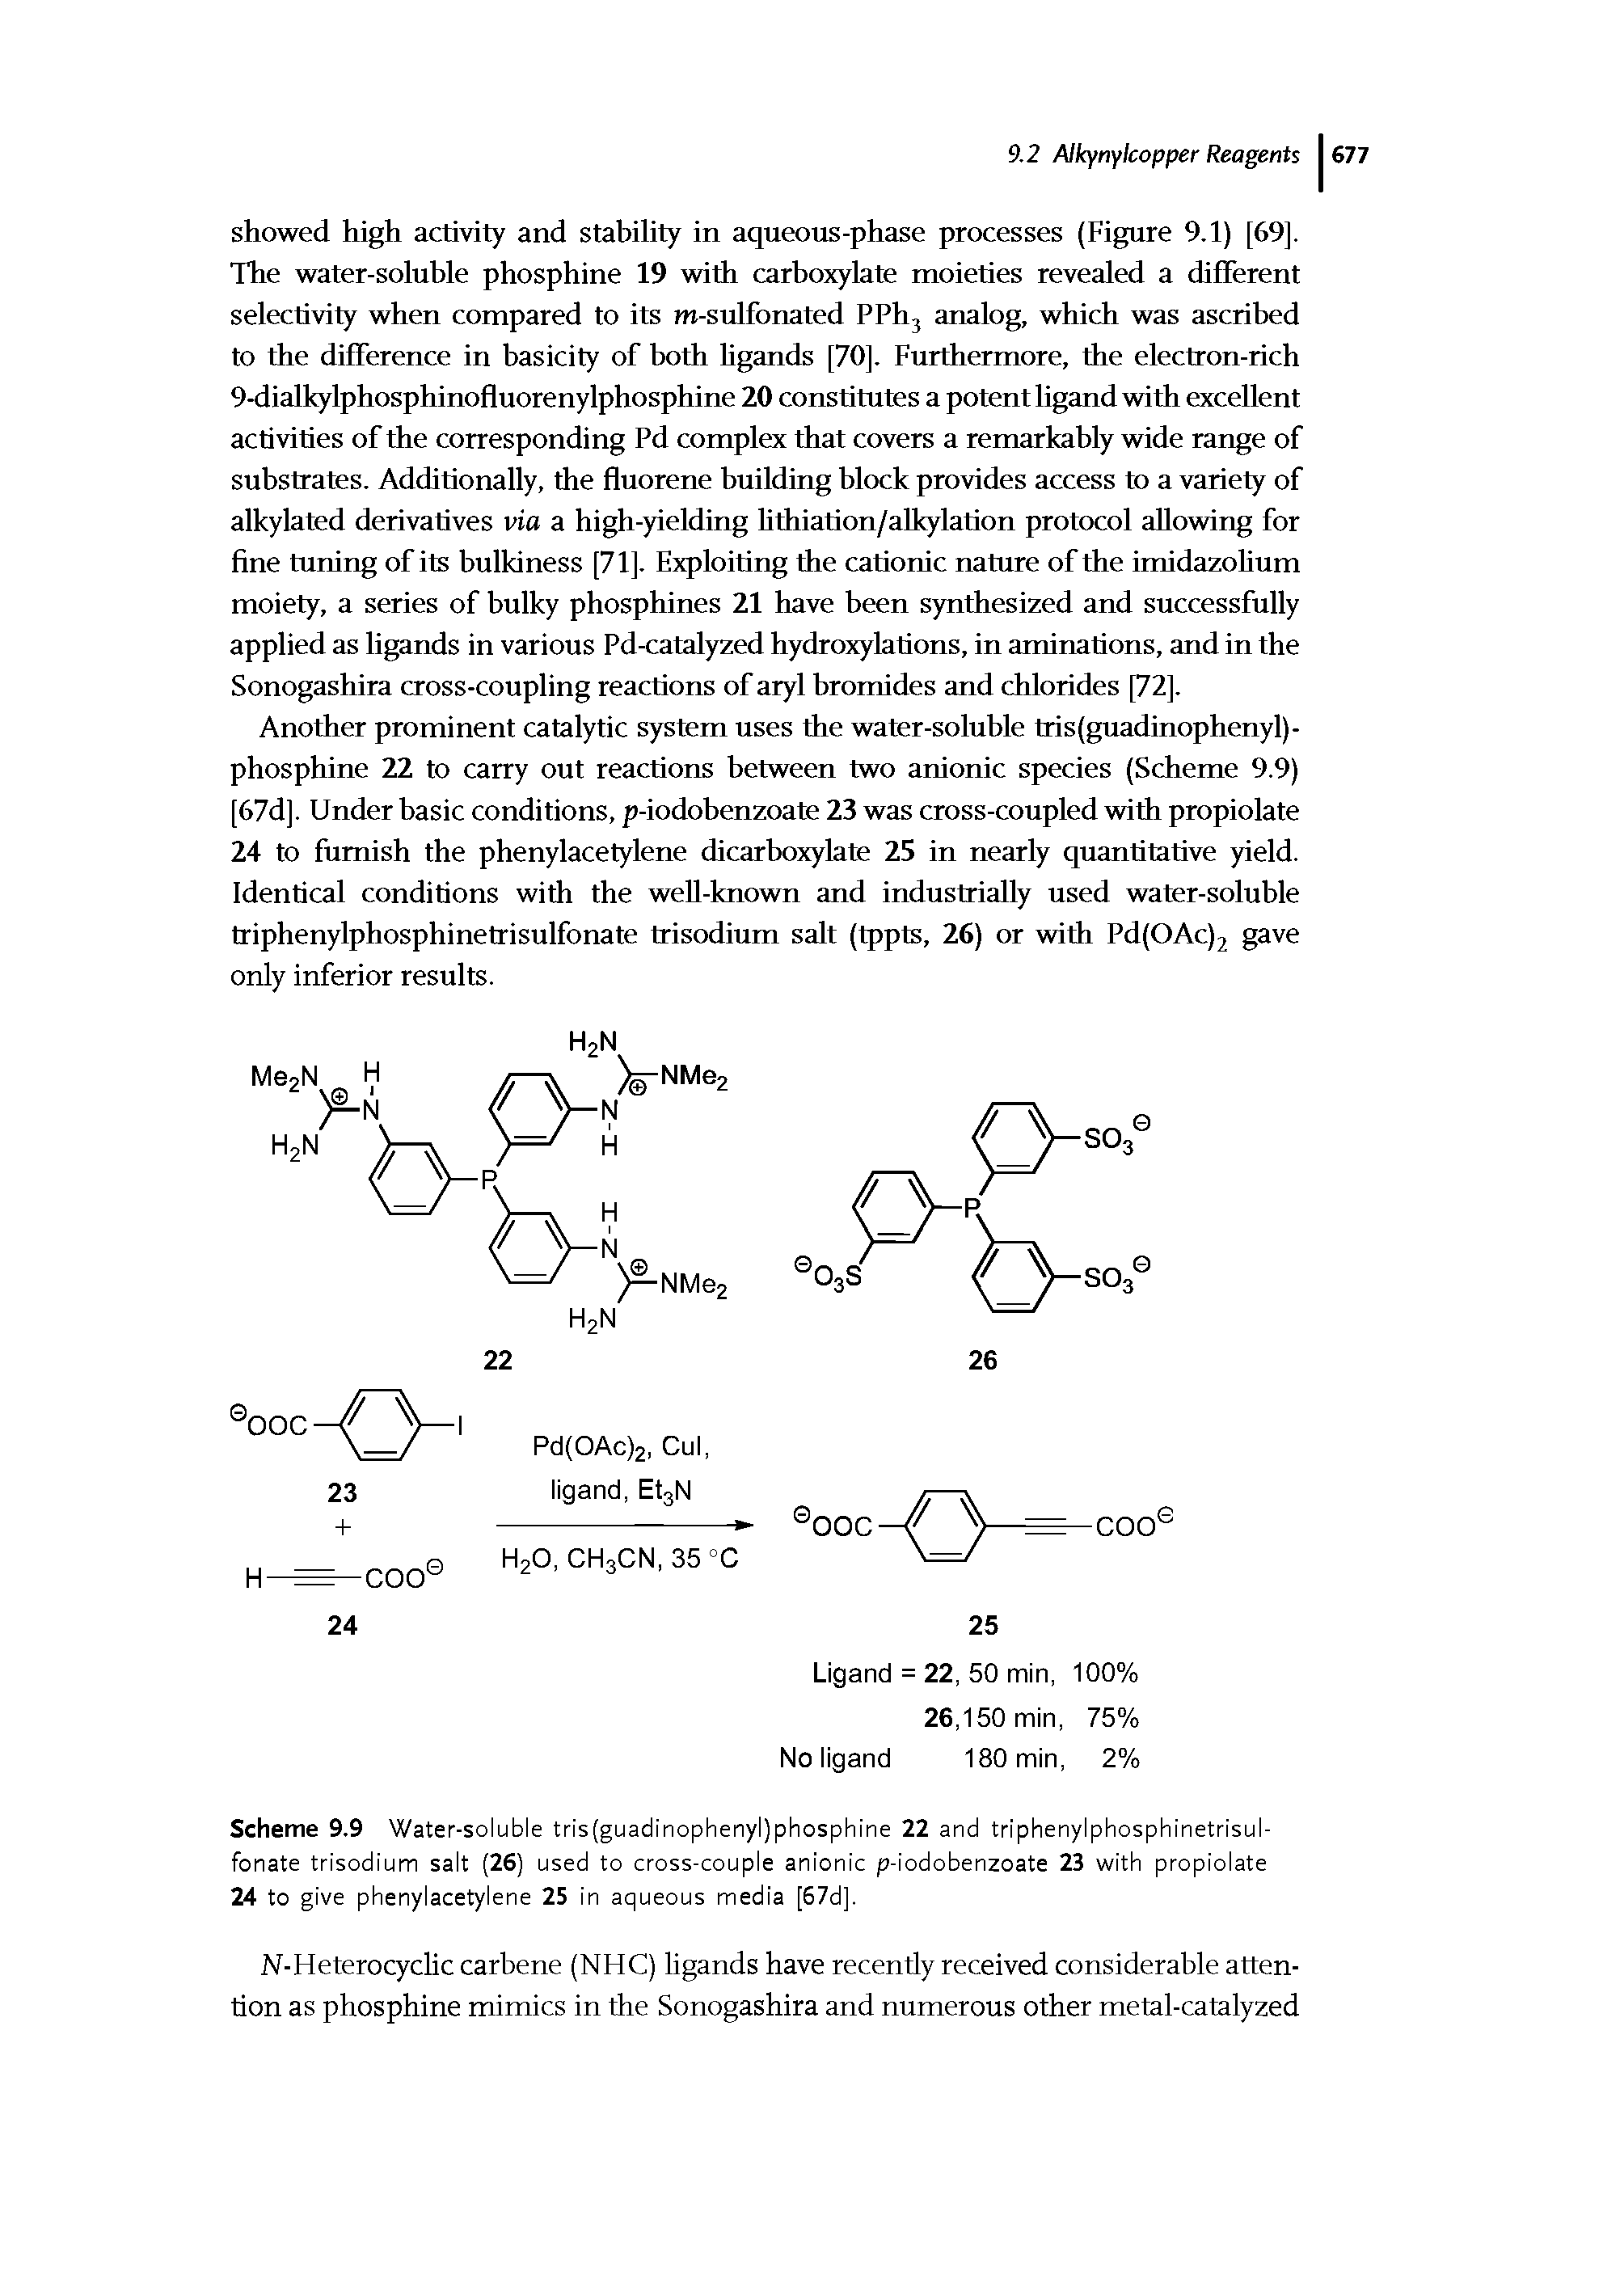 Scheme 9.9 Water-soluble tris(guadinophenyl)phosphine 22 and triphenylphosphinetrisulfonate trisodium salt (26) used to cross-couple anionic p-iodobenzoate 23 with propiolate 24 to give phenylacetylene 25 in aqueous media [67dj.